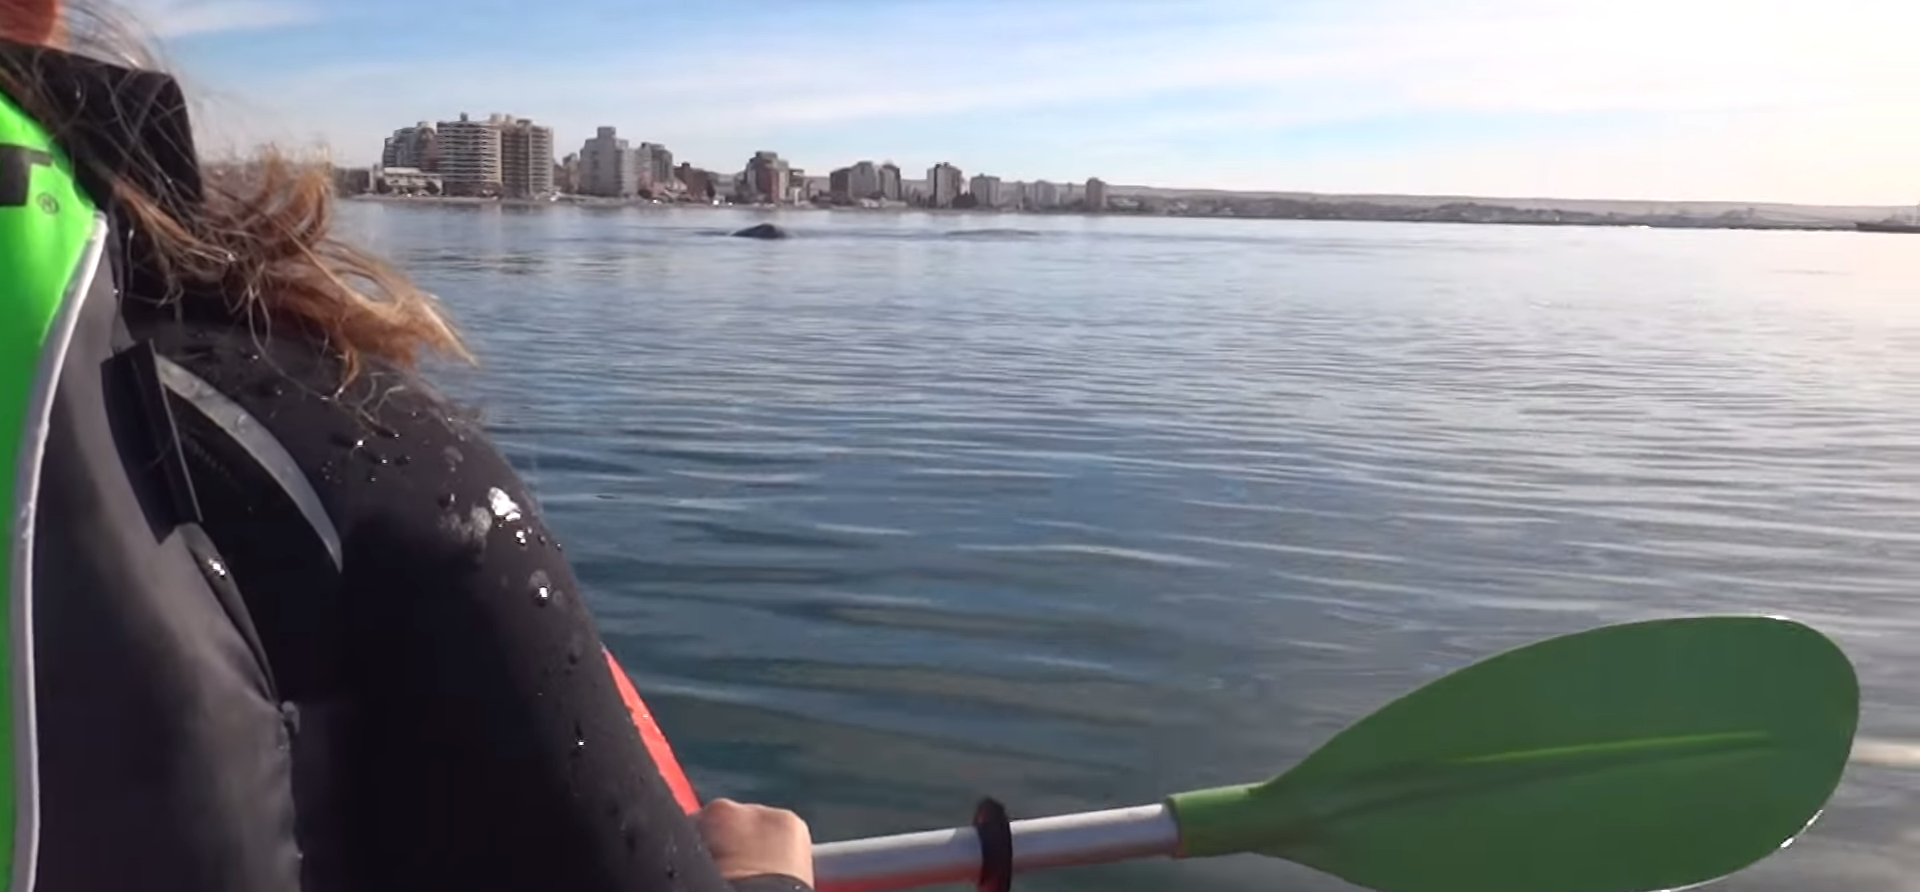 A kayak encounters a friendly collision with a whale